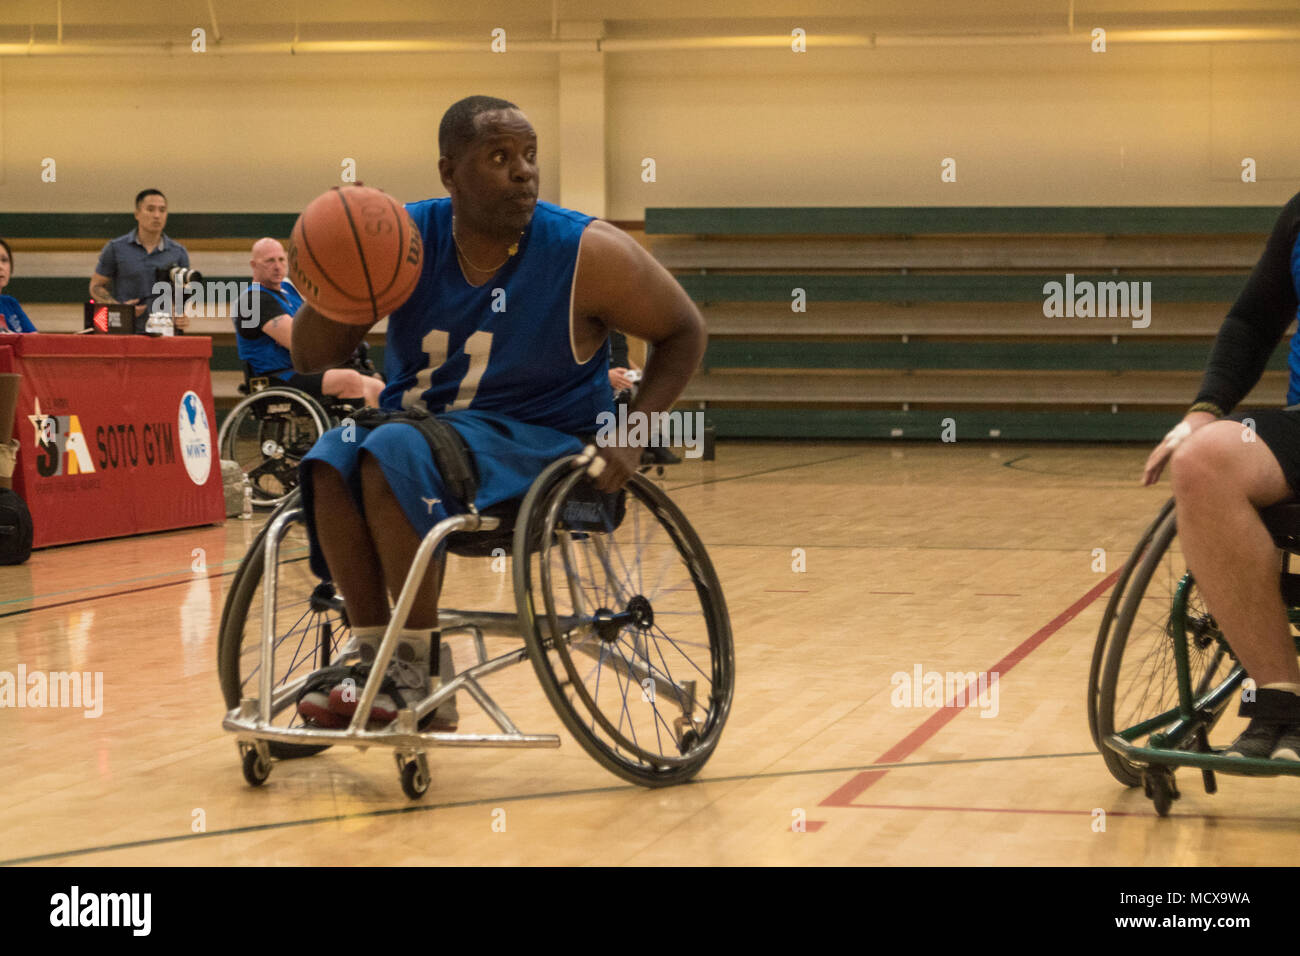 Retired U.S. Army Sgt 1st Class Carl Morgan, formerly assigned to the Warrior Transition Battalion, Fort Gillem looks for a teammate to pass the ball to during a game of Wheelchair Basketball at Fort Bliss, Texas, March 4, 2018. 74 wounded, ill or injured active duty Soldiers and veterans participate in a series of events that are held at Fort Bliss, Texas, Feb. 27 through March 9, 2018 as the Deputy Chief of Staff, Warrior Care and Transition host the 2018 Army Trials. (U.S. Army photo by Sgt. Brooks Schnetzler) Stock Photo